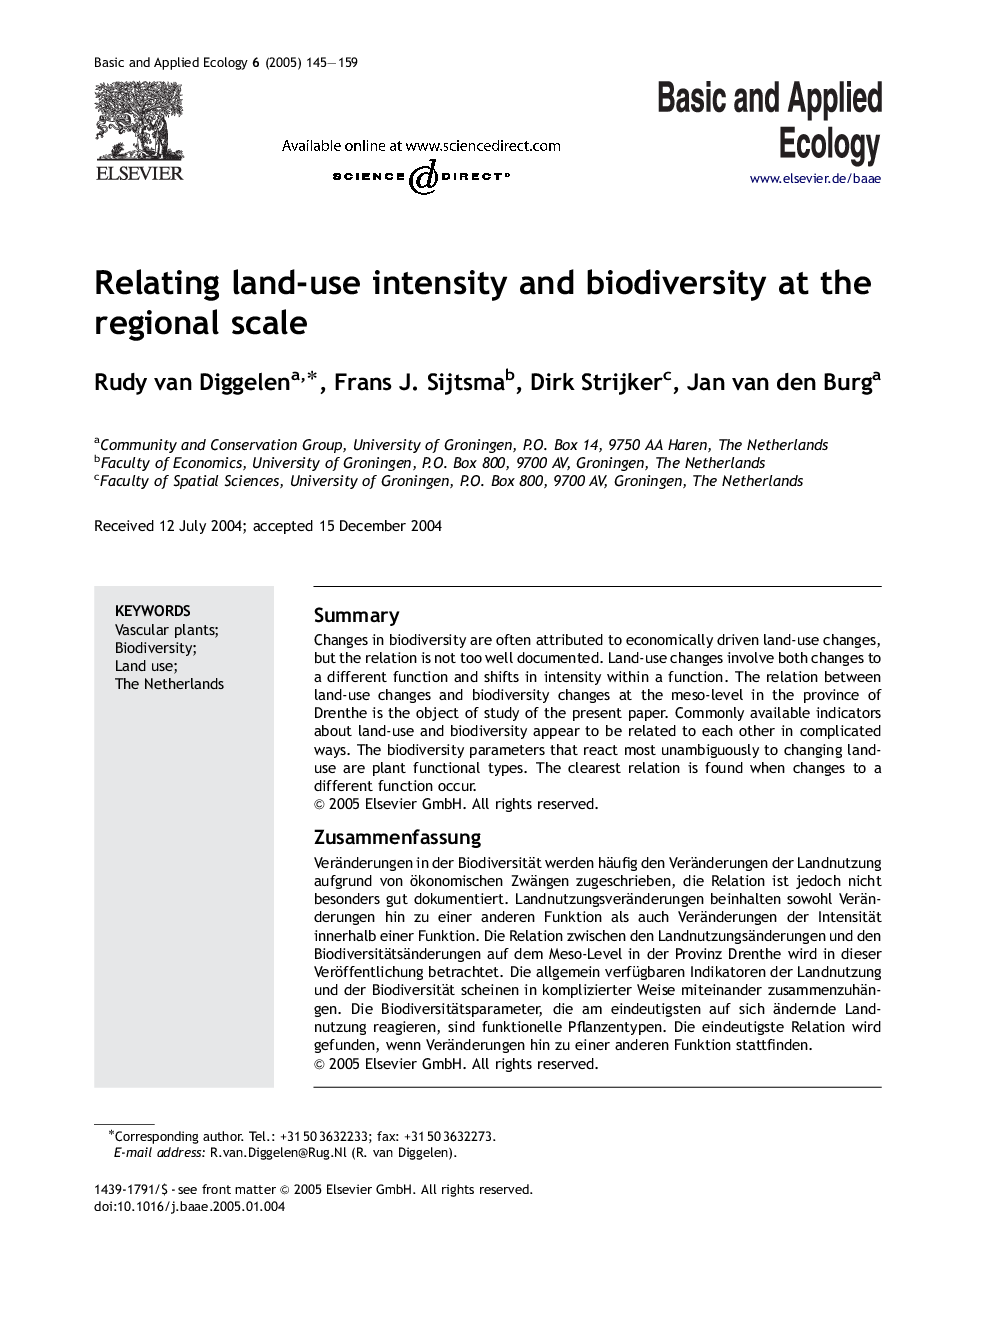 Relating land-use intensity and biodiversity at the regional scale